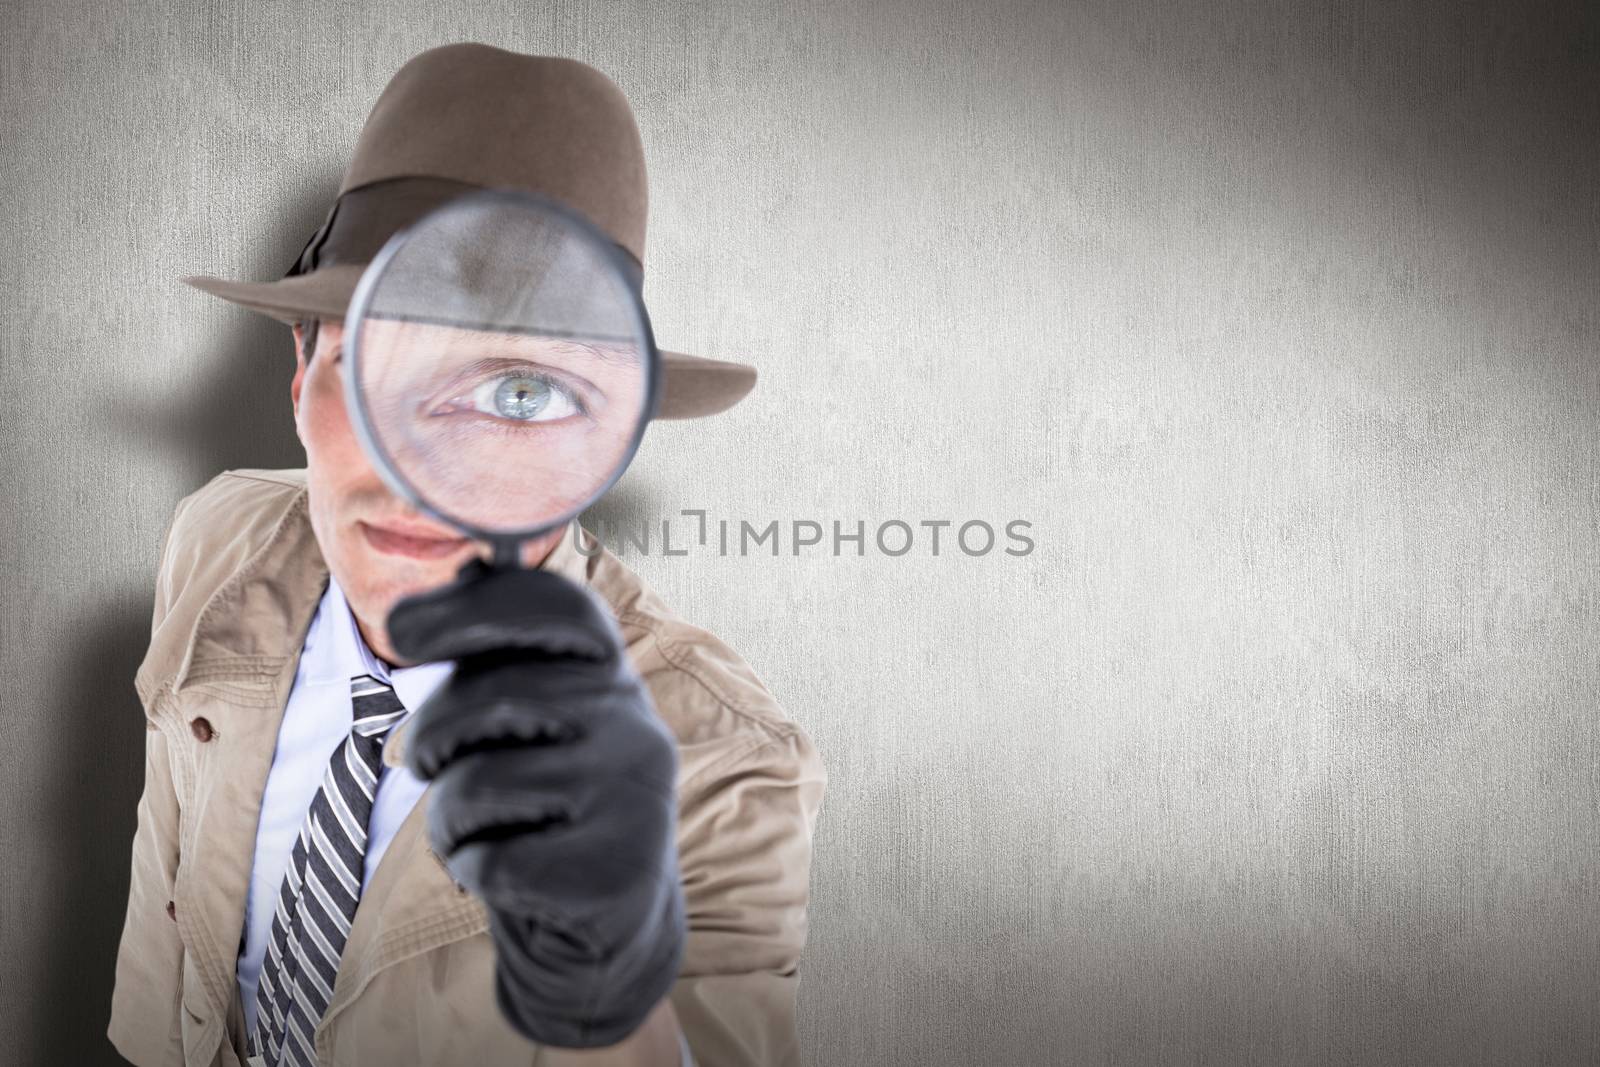 Spy looking through magnifier against white and grey background